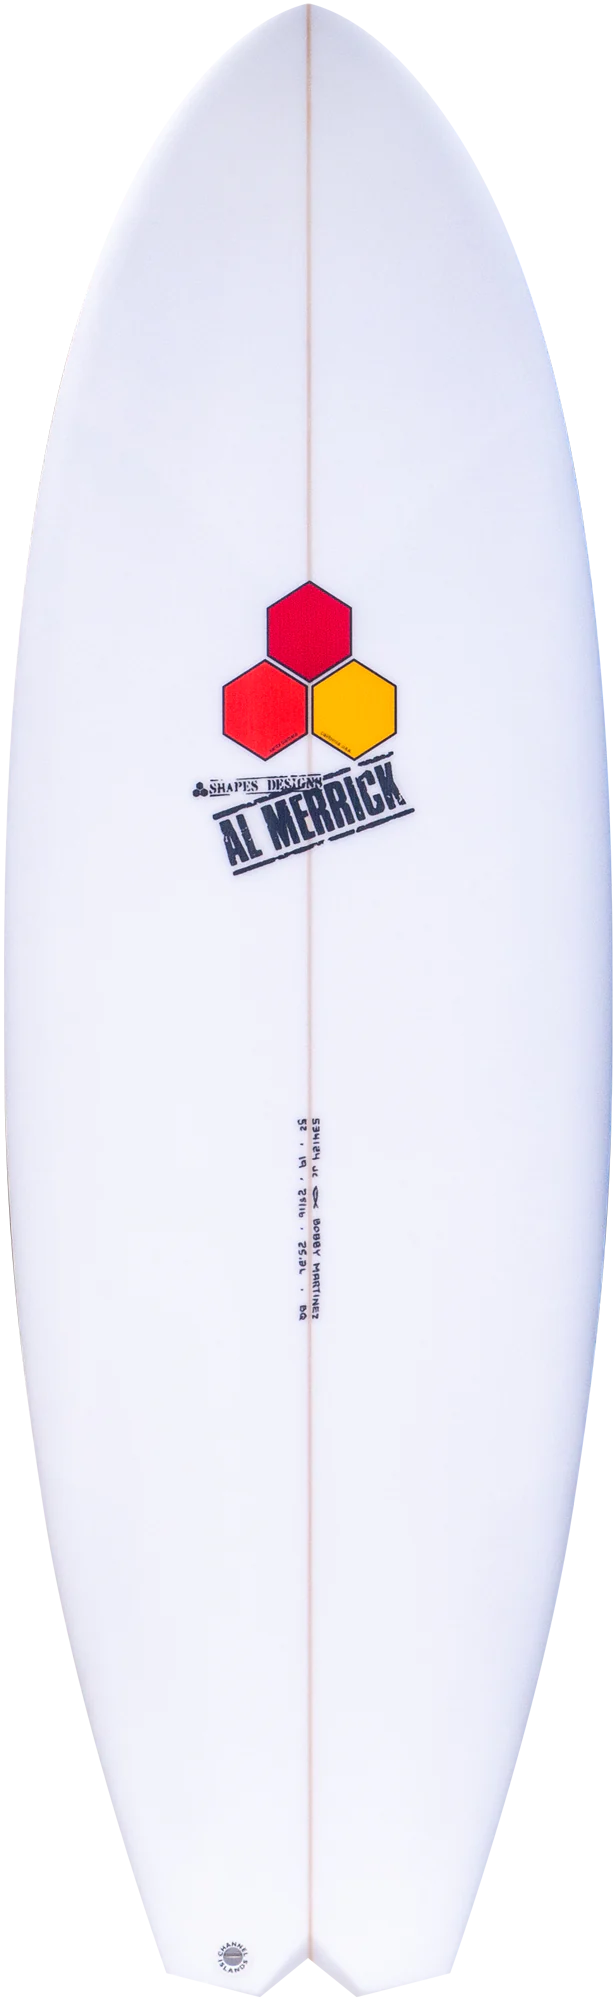 Channel Islands Bobby Quad 5'6" Surfboard